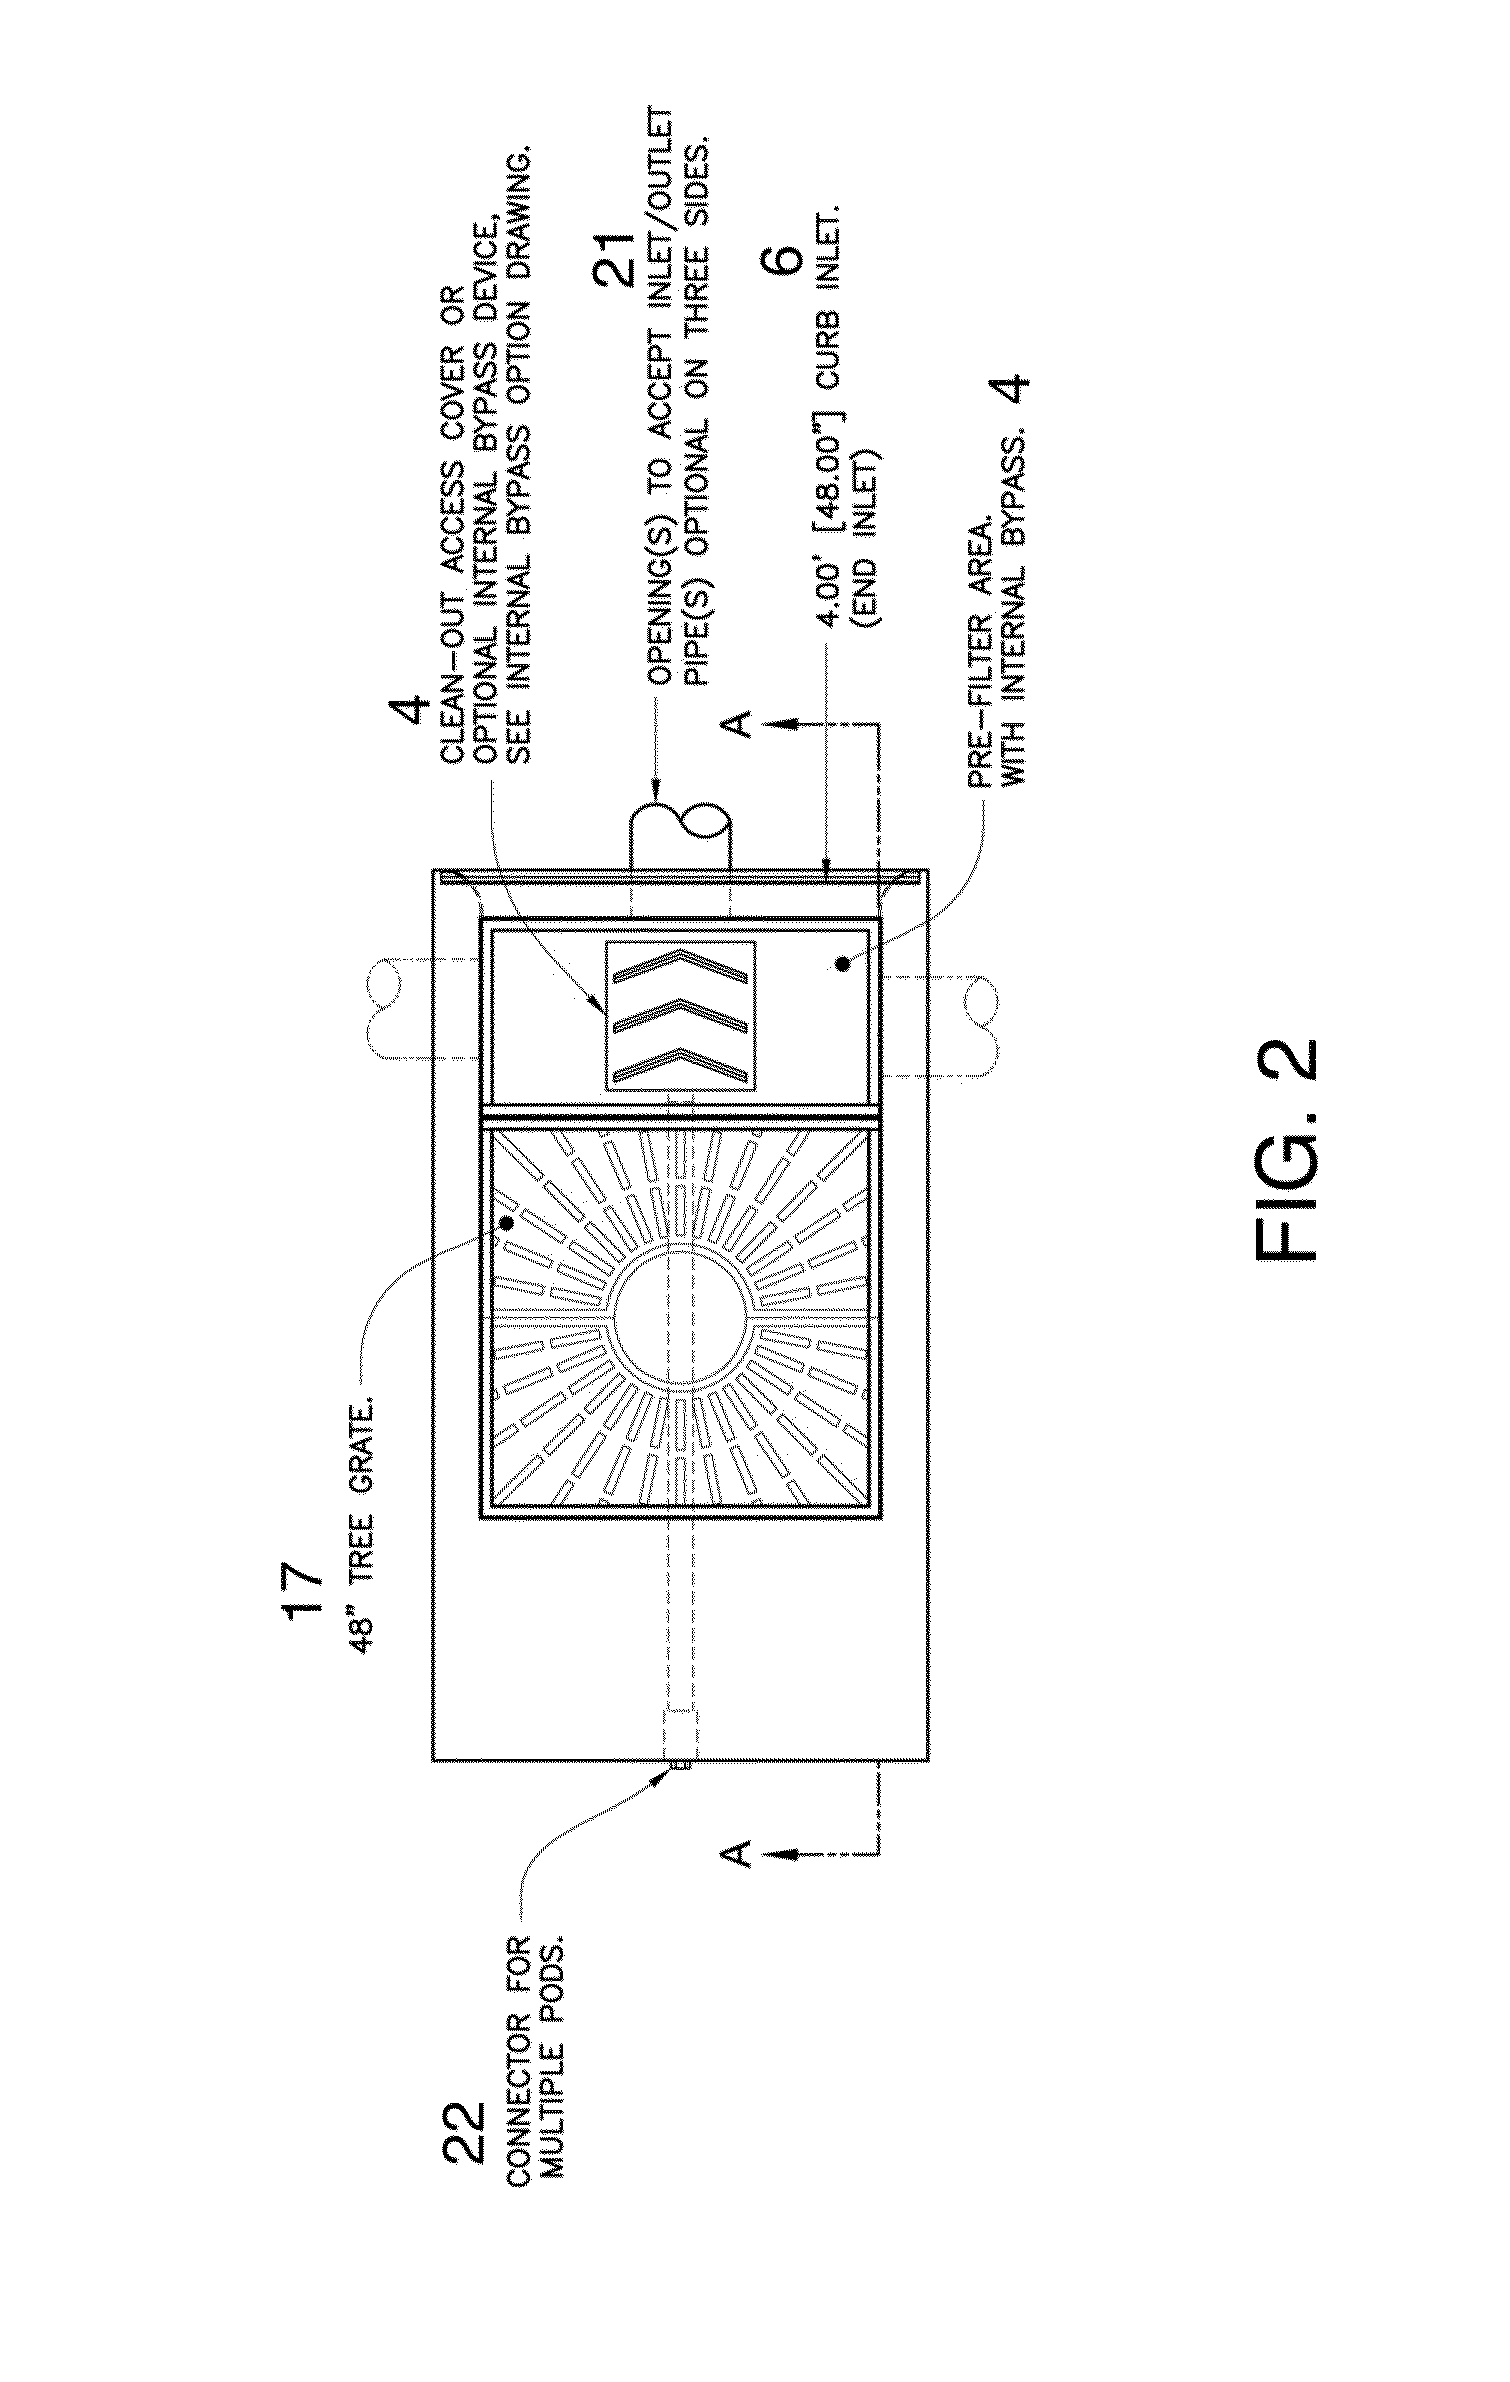 Bioretention system with high internal high flow bypass